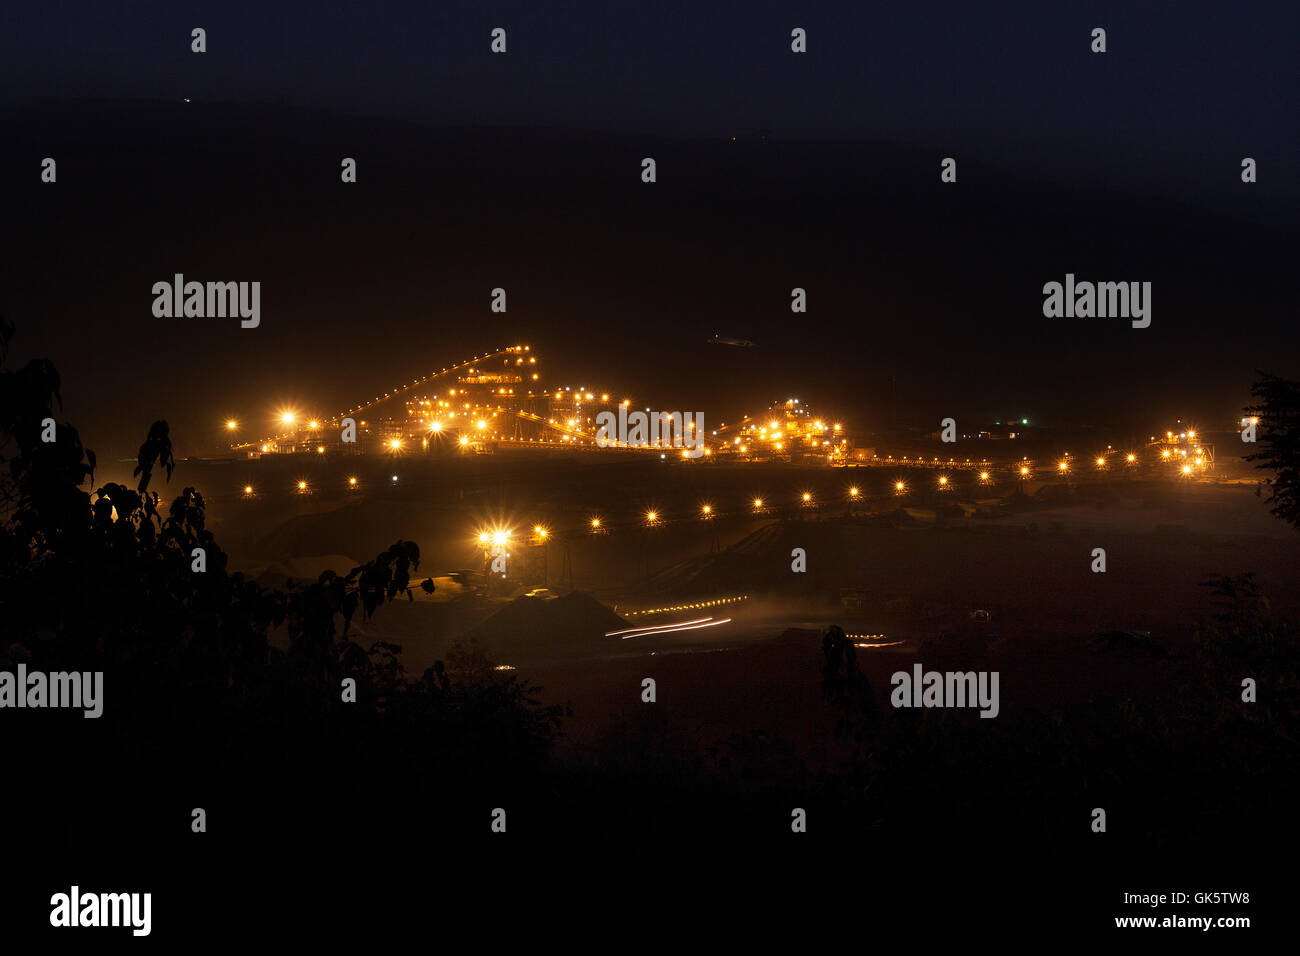 Mining operations for transporting and managing iron ore. Wide view at night new mine processing plant lit up and illuminated.  West Africa. Stock Photo